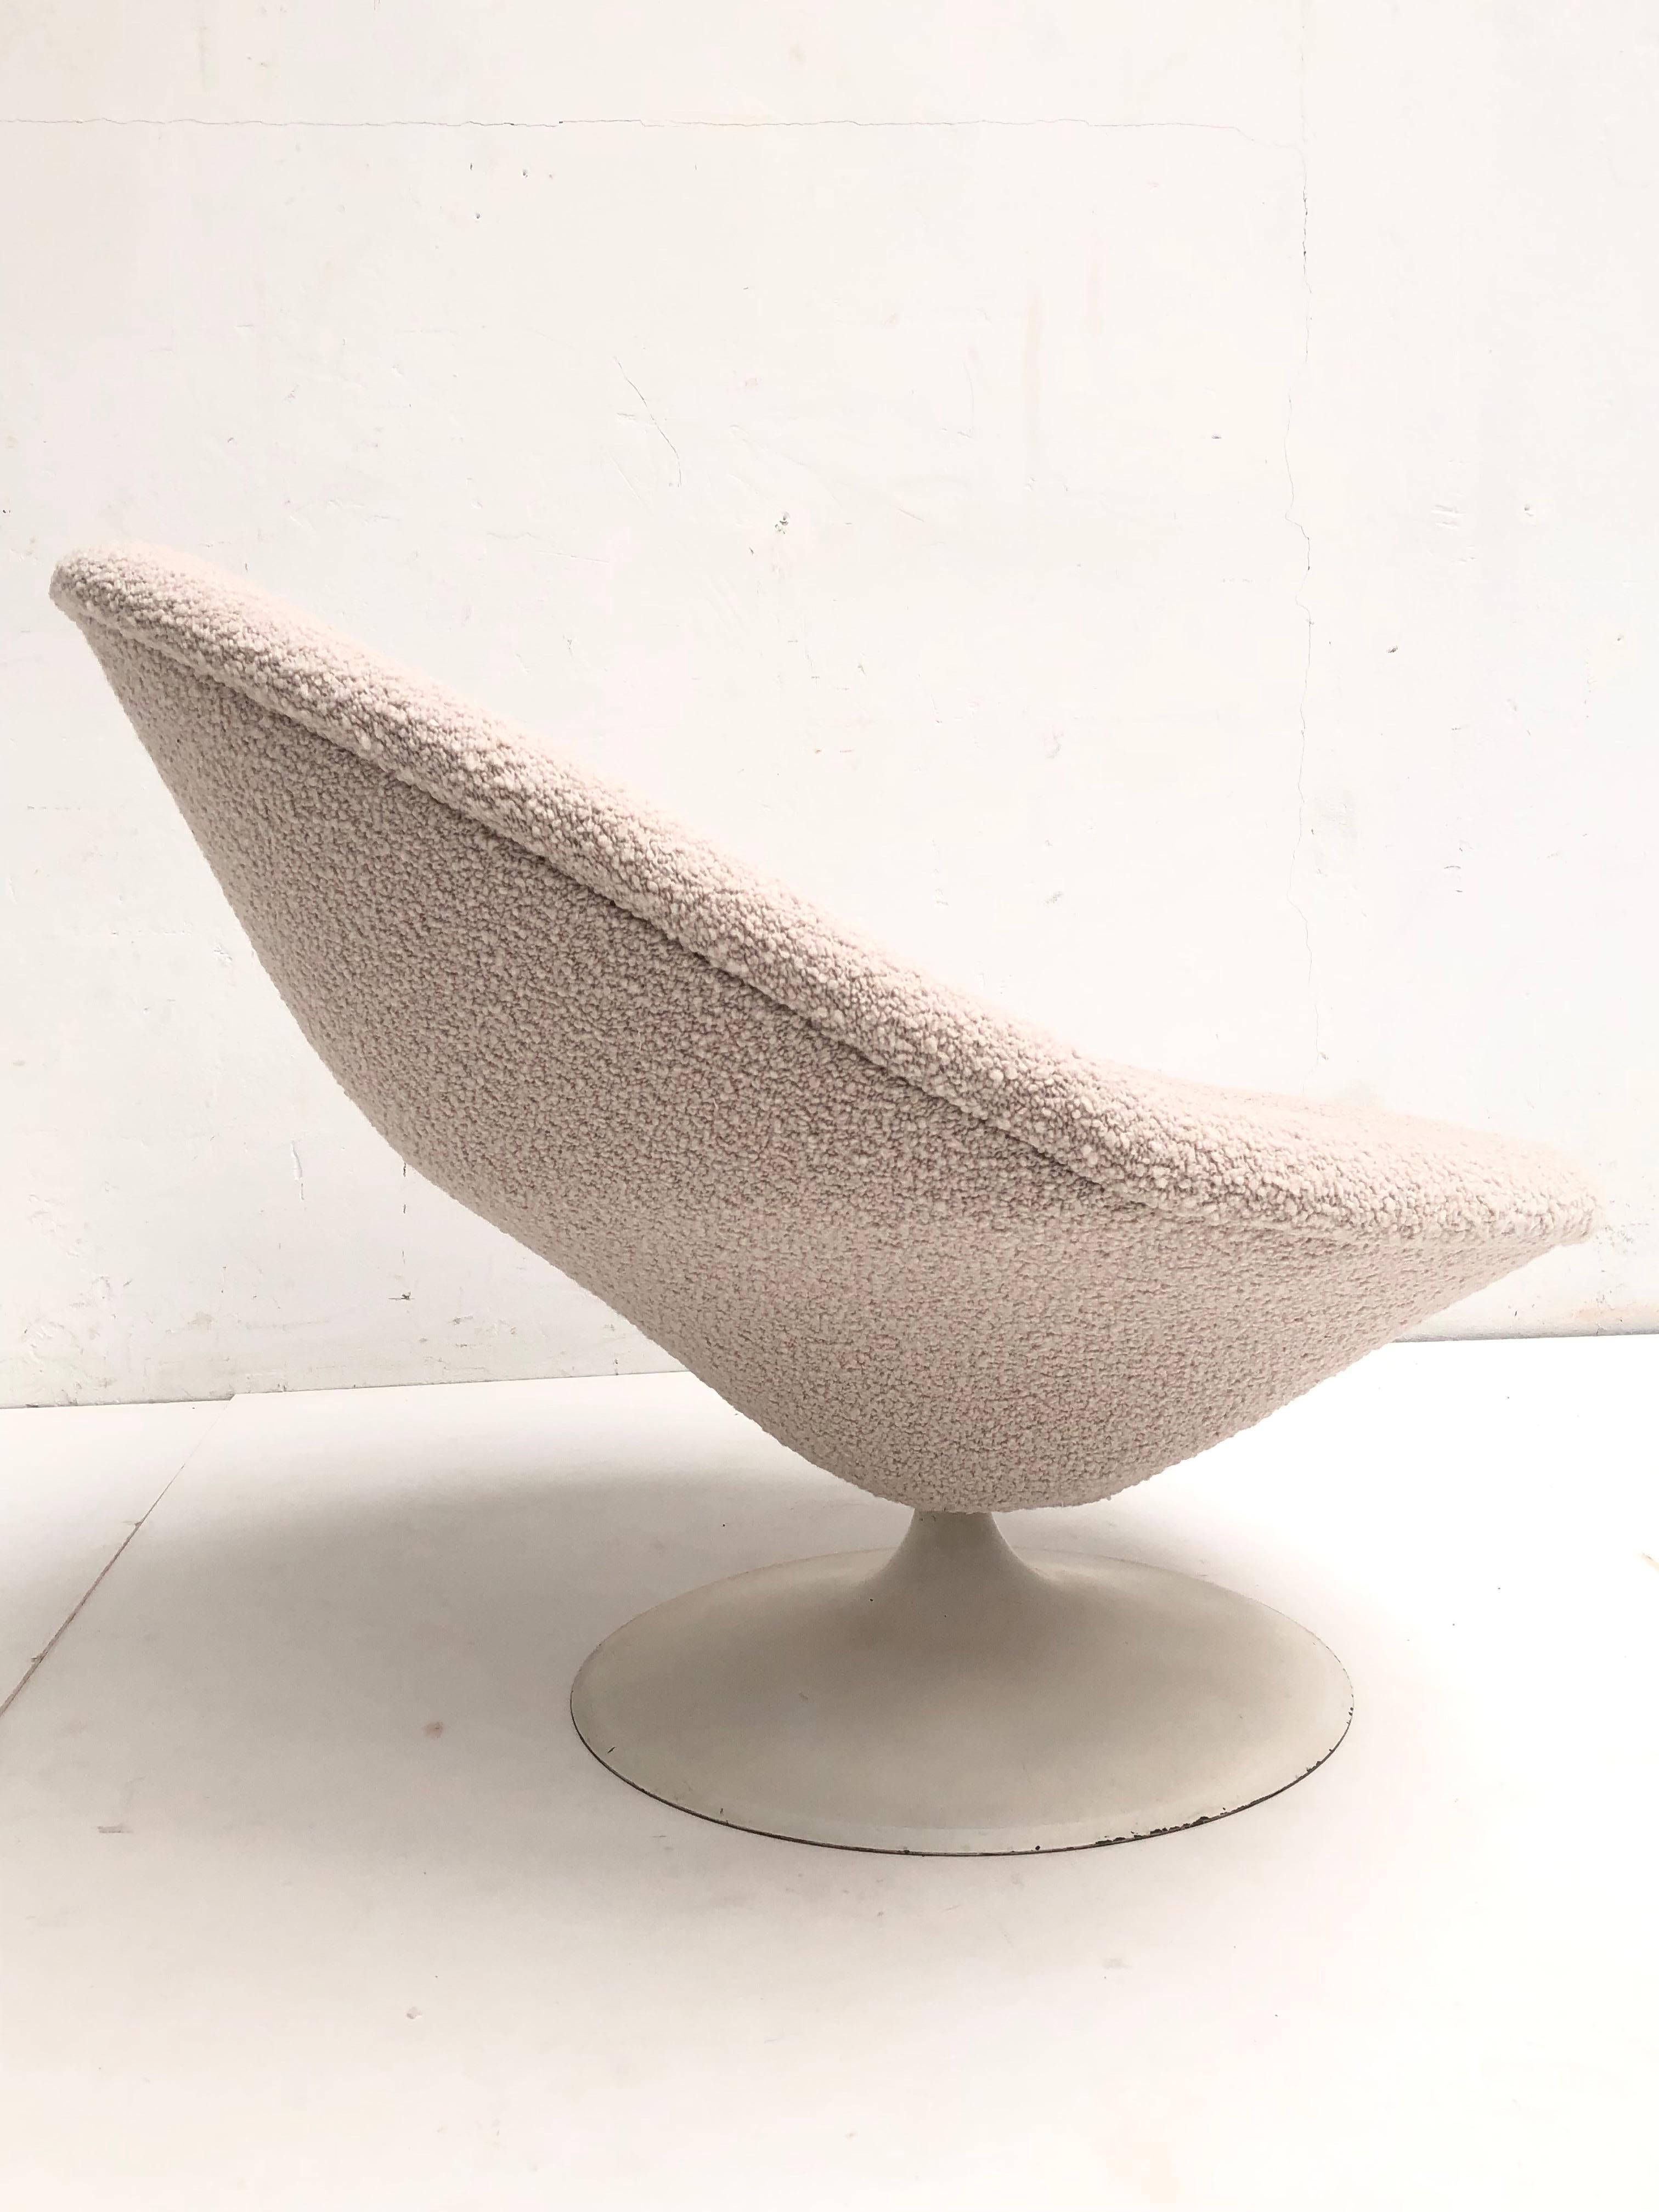 Mid-Century Modern Pierre Paulin First Edition Globe Chair F584 Artifort 1960 with New Wool Boucle